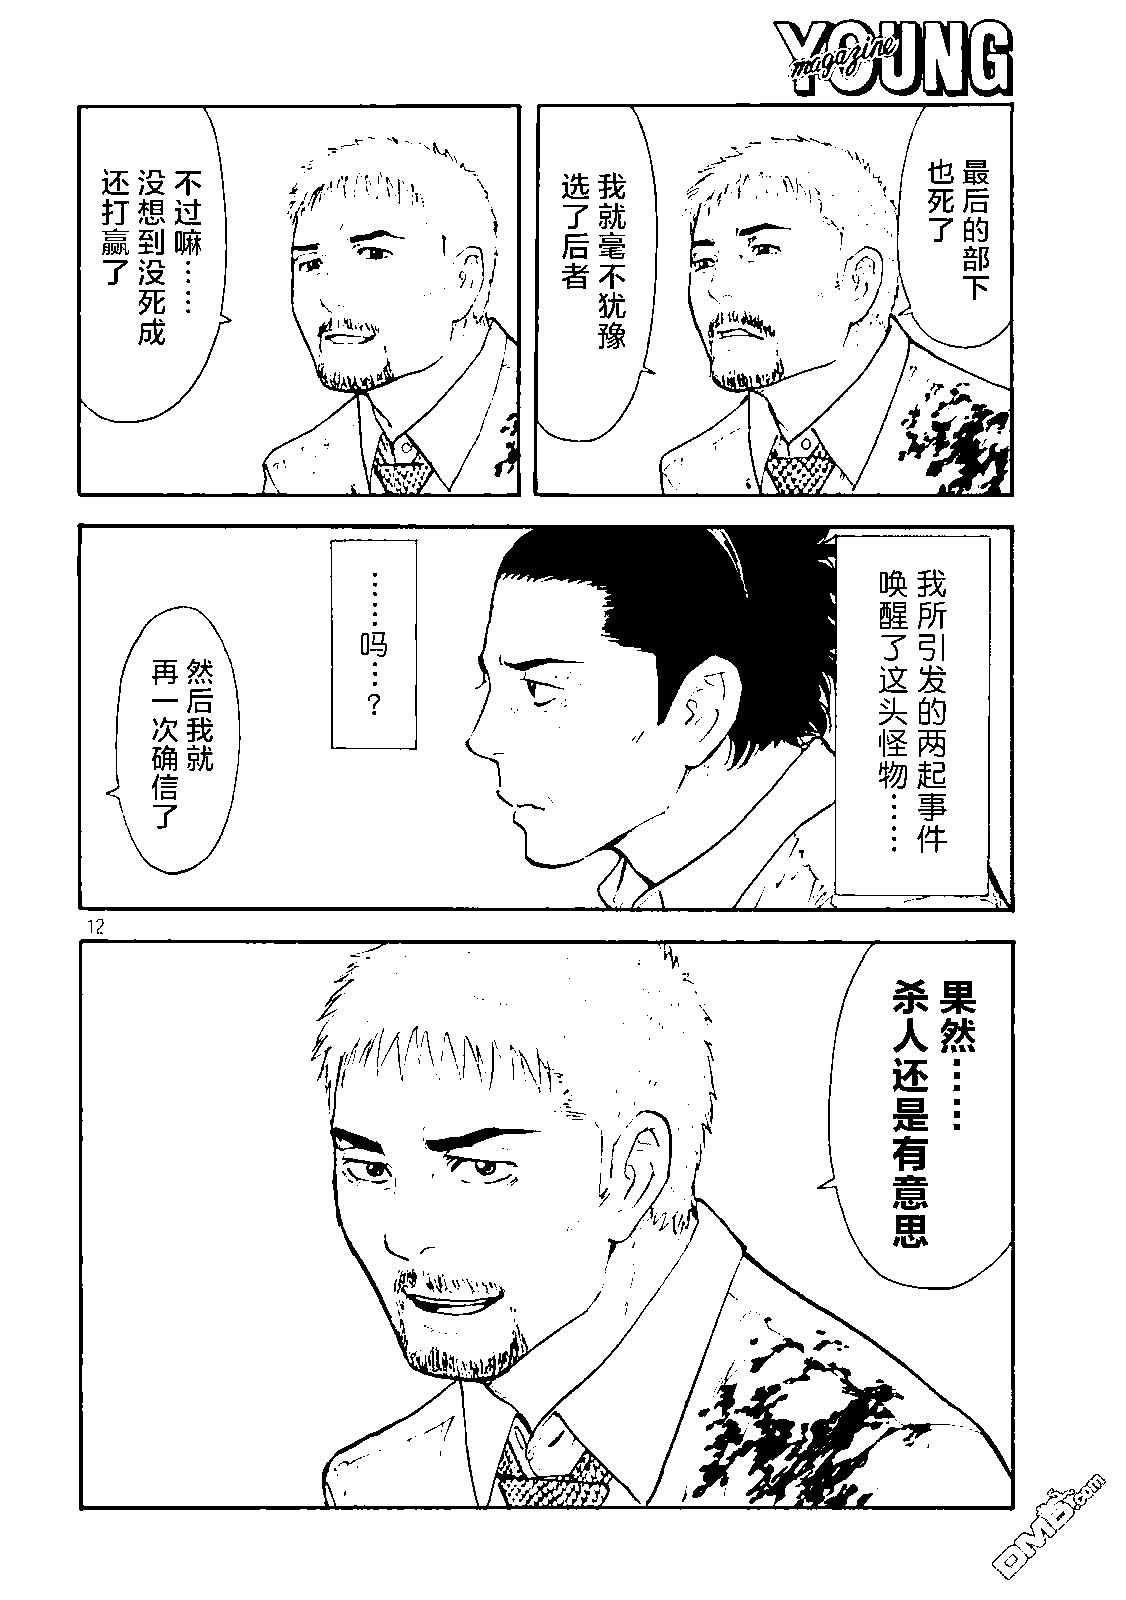 MY HOME HERO - 第146話 兩人的對話 - 2